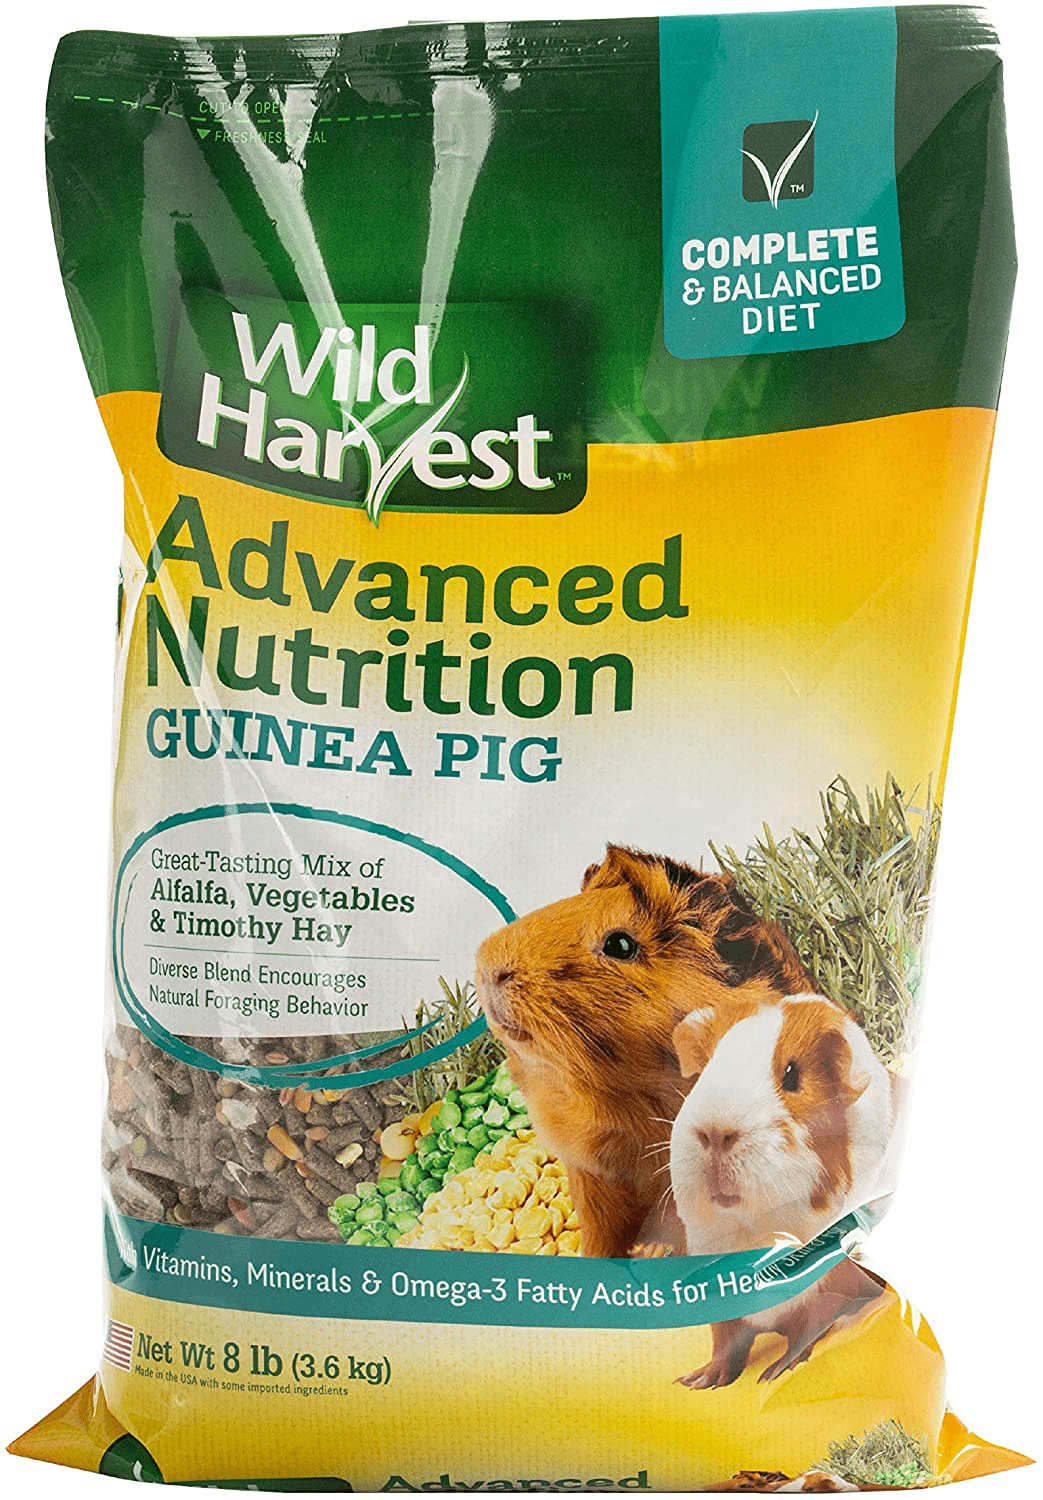 Wild Harvest Advanced Nutrition Guinea Pig 8 Pounds, Complete and Balanced Diet, Pack of 3 (G19708)